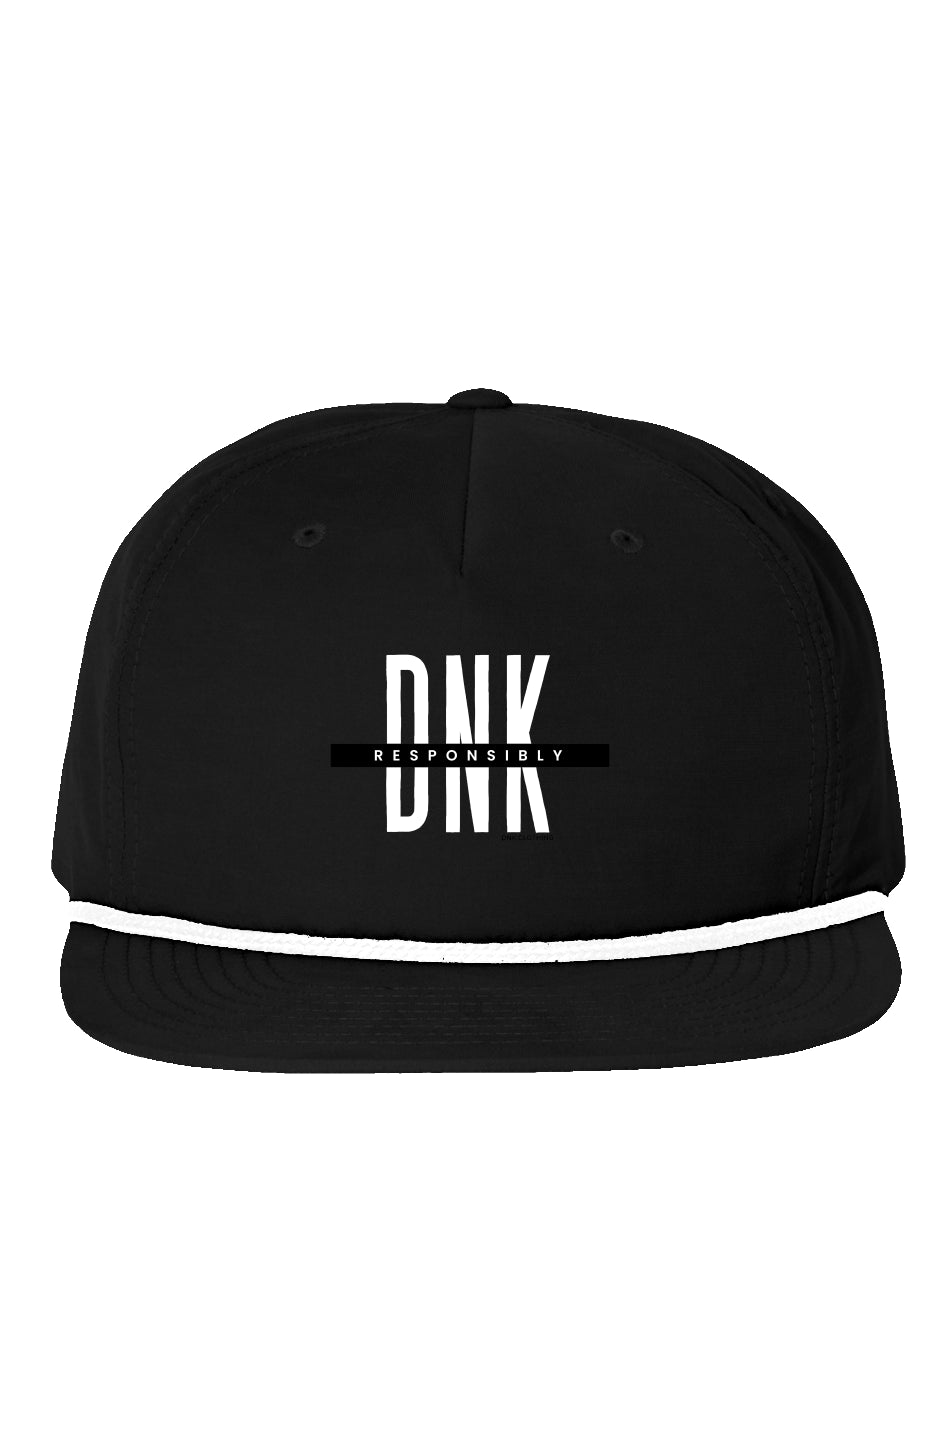 DNK Responsibly Hat